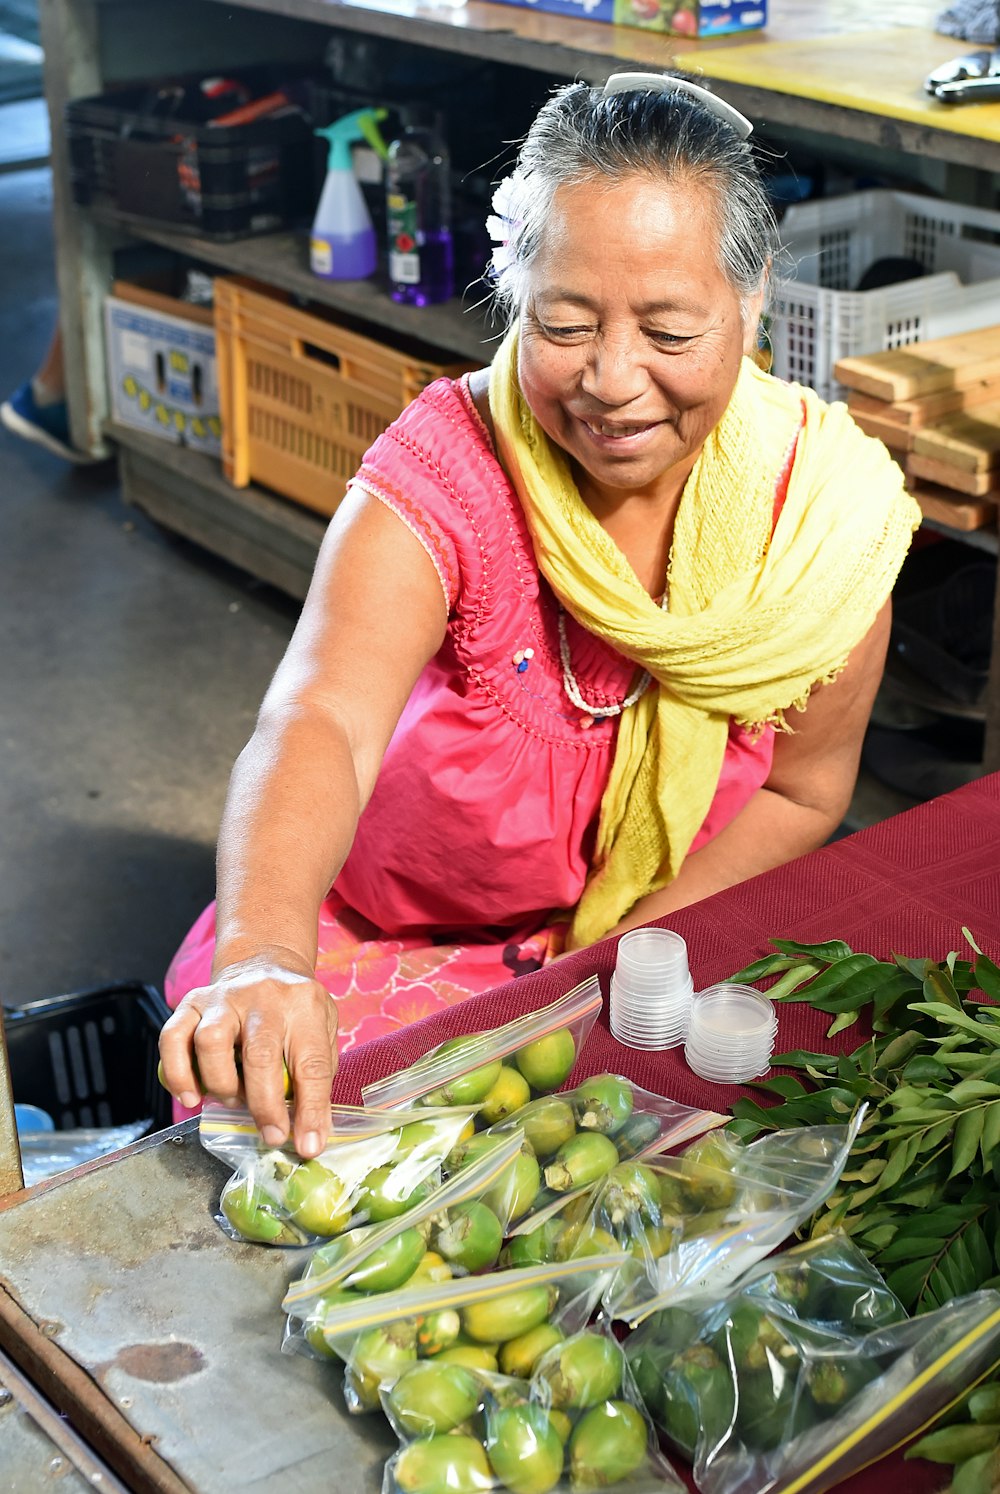 a woman in a yellow scarf is cutting green apples